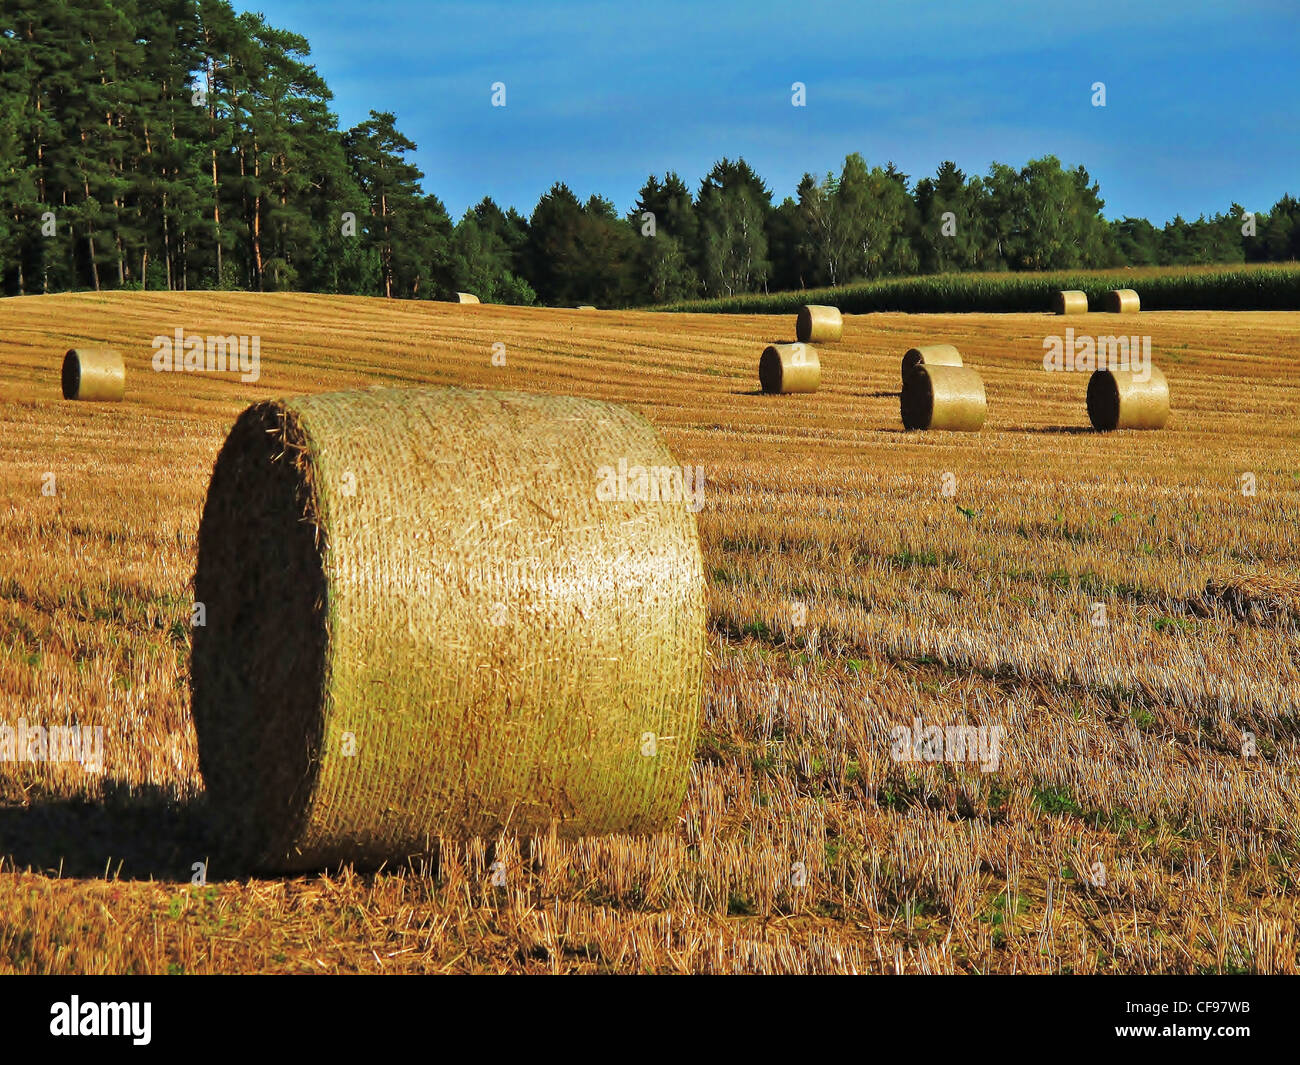 Field, Upper Palatinate, straw bale, agriculture, harvest, crop, Germany Stock Photo